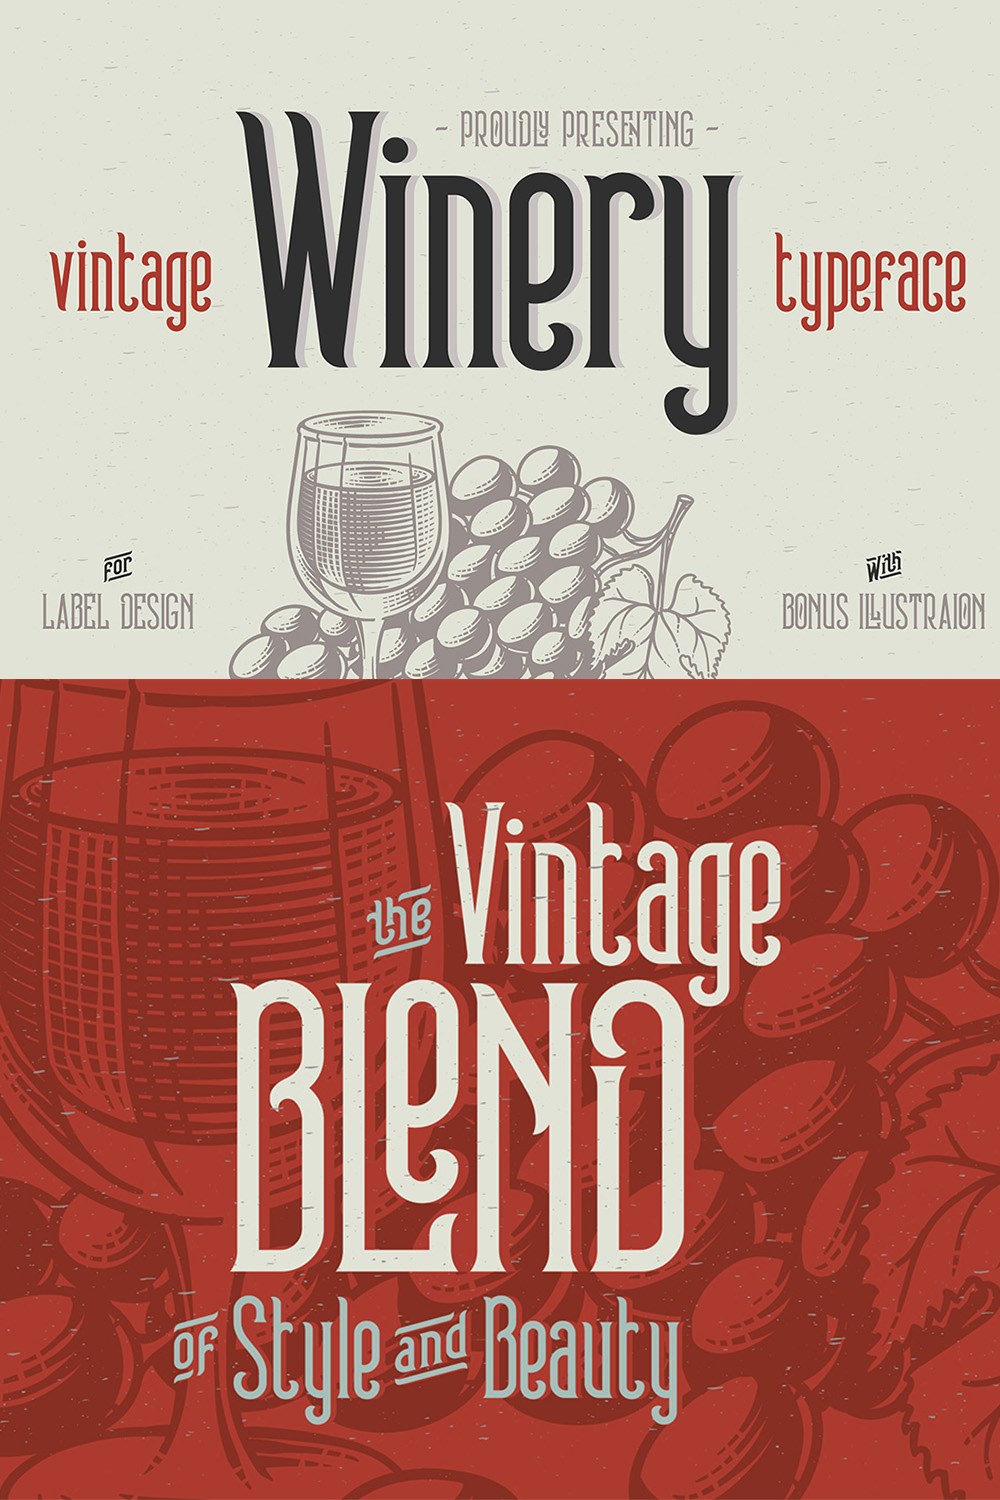 Pinterest image with Winery Typeface.